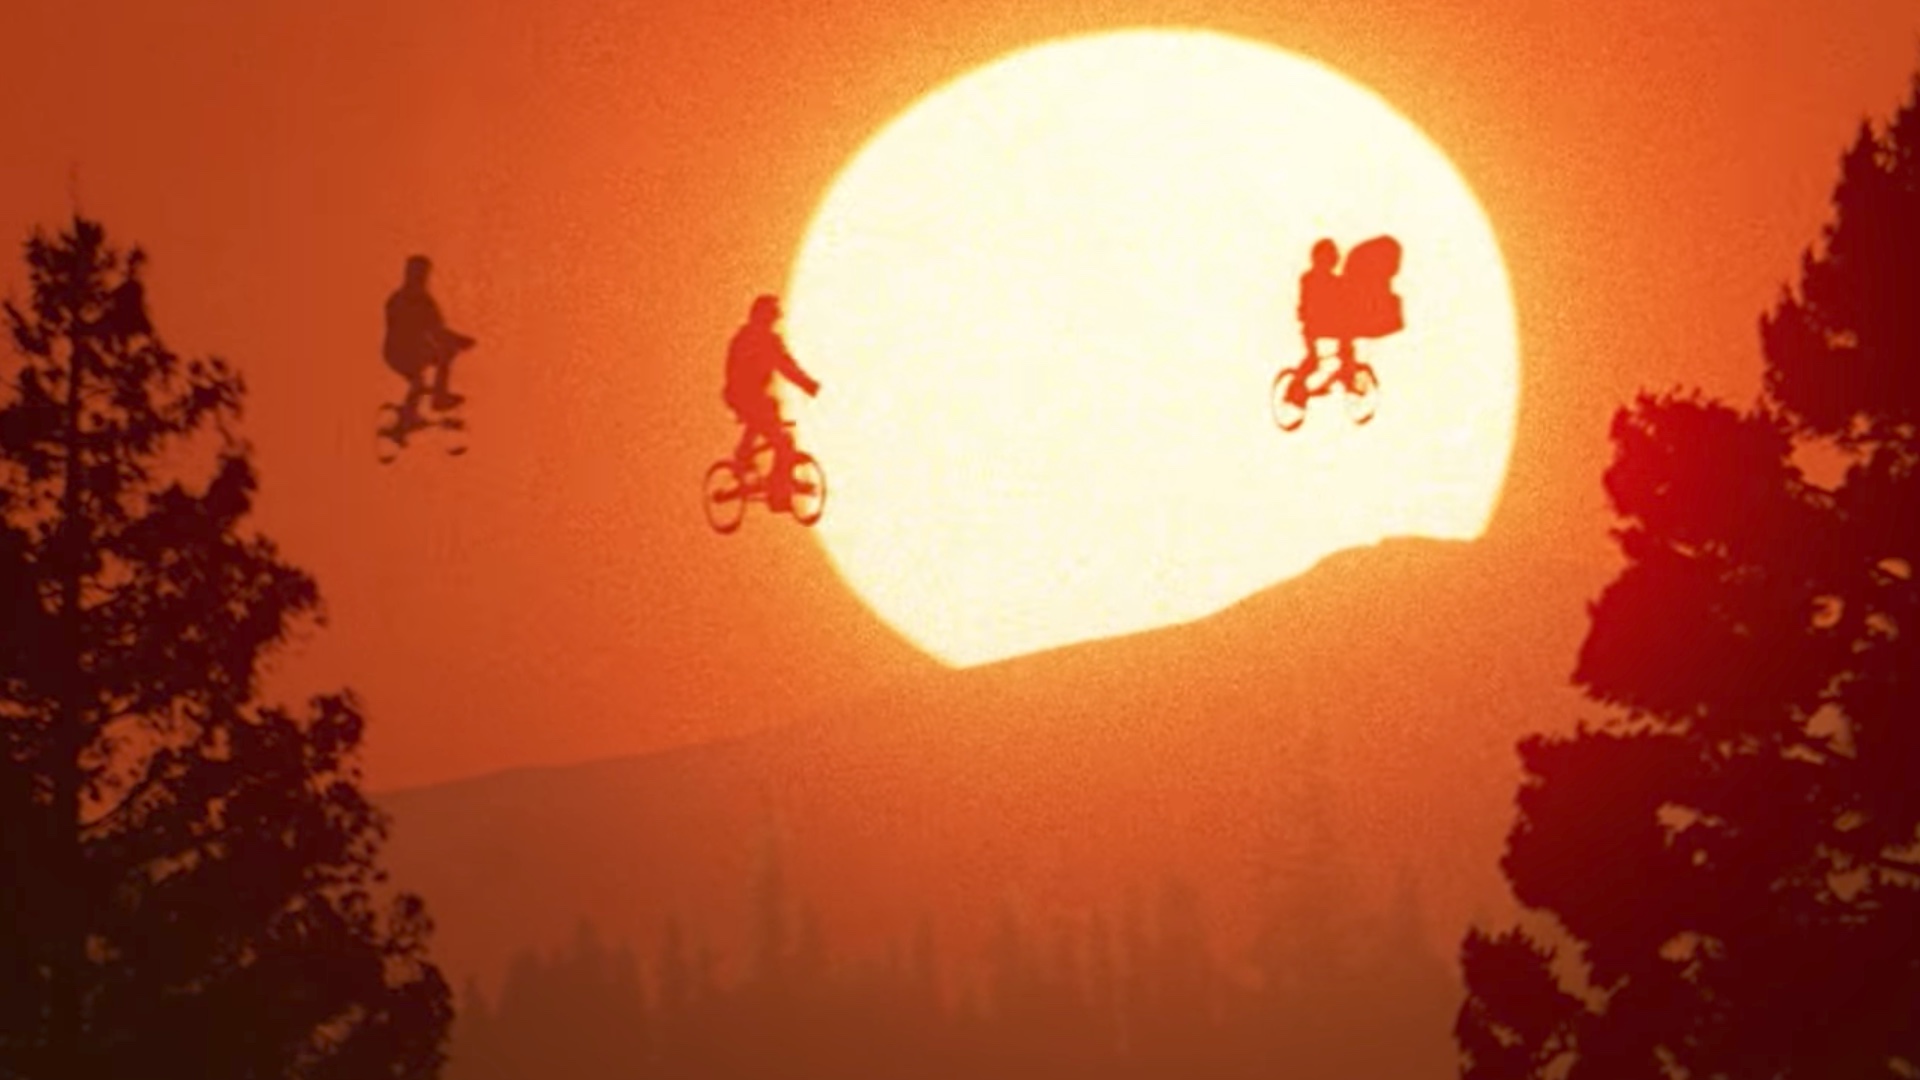 ET and the kids flying their bicycles across the sunset
